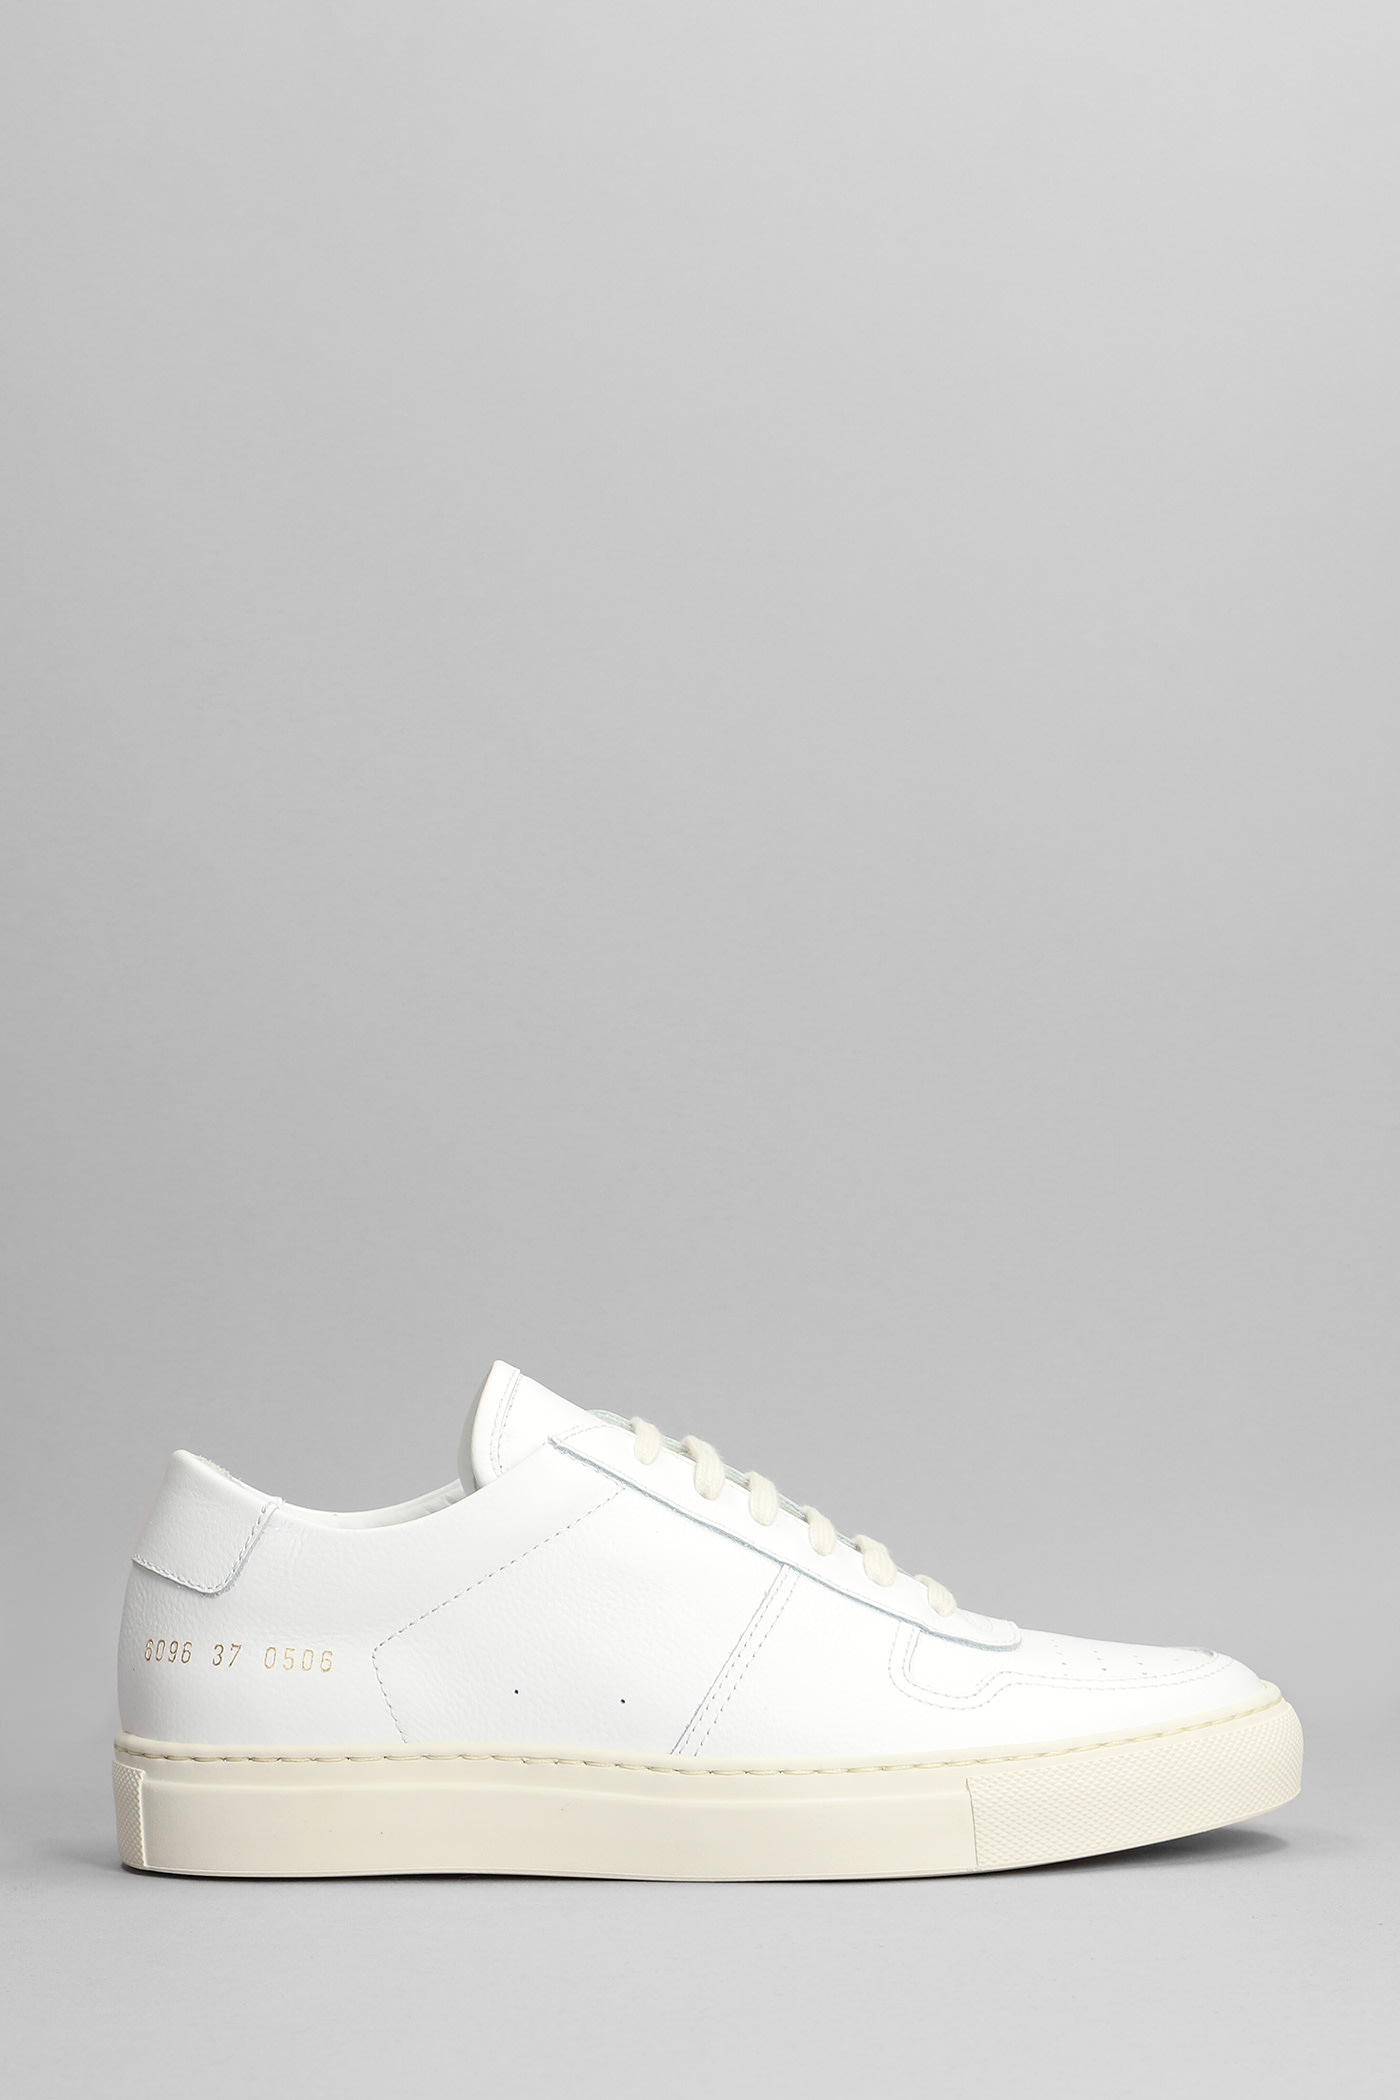 Common Projects Bball Sneakers In White Leather